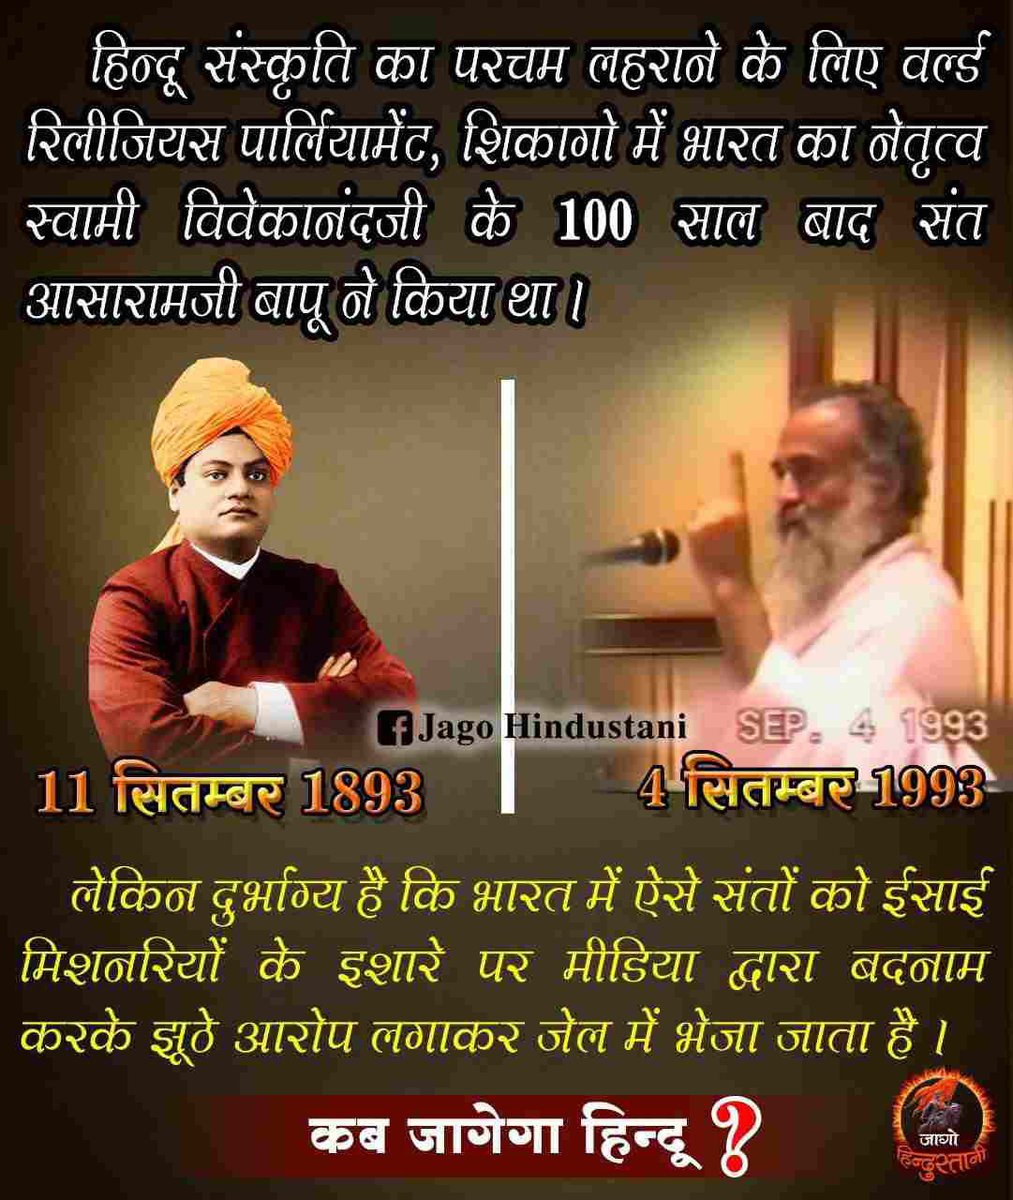 The life of Sant Shri Asharamji Bapu clearly shows that #EkSantKafiHain to protect millions from the clutches of unethical conversions, promote cultural values, save cows from slaughterhouse & spread glories of Sanatan Dhrama as a true Spiritual Leader . youtu.be/2Xa-9PB2sbk